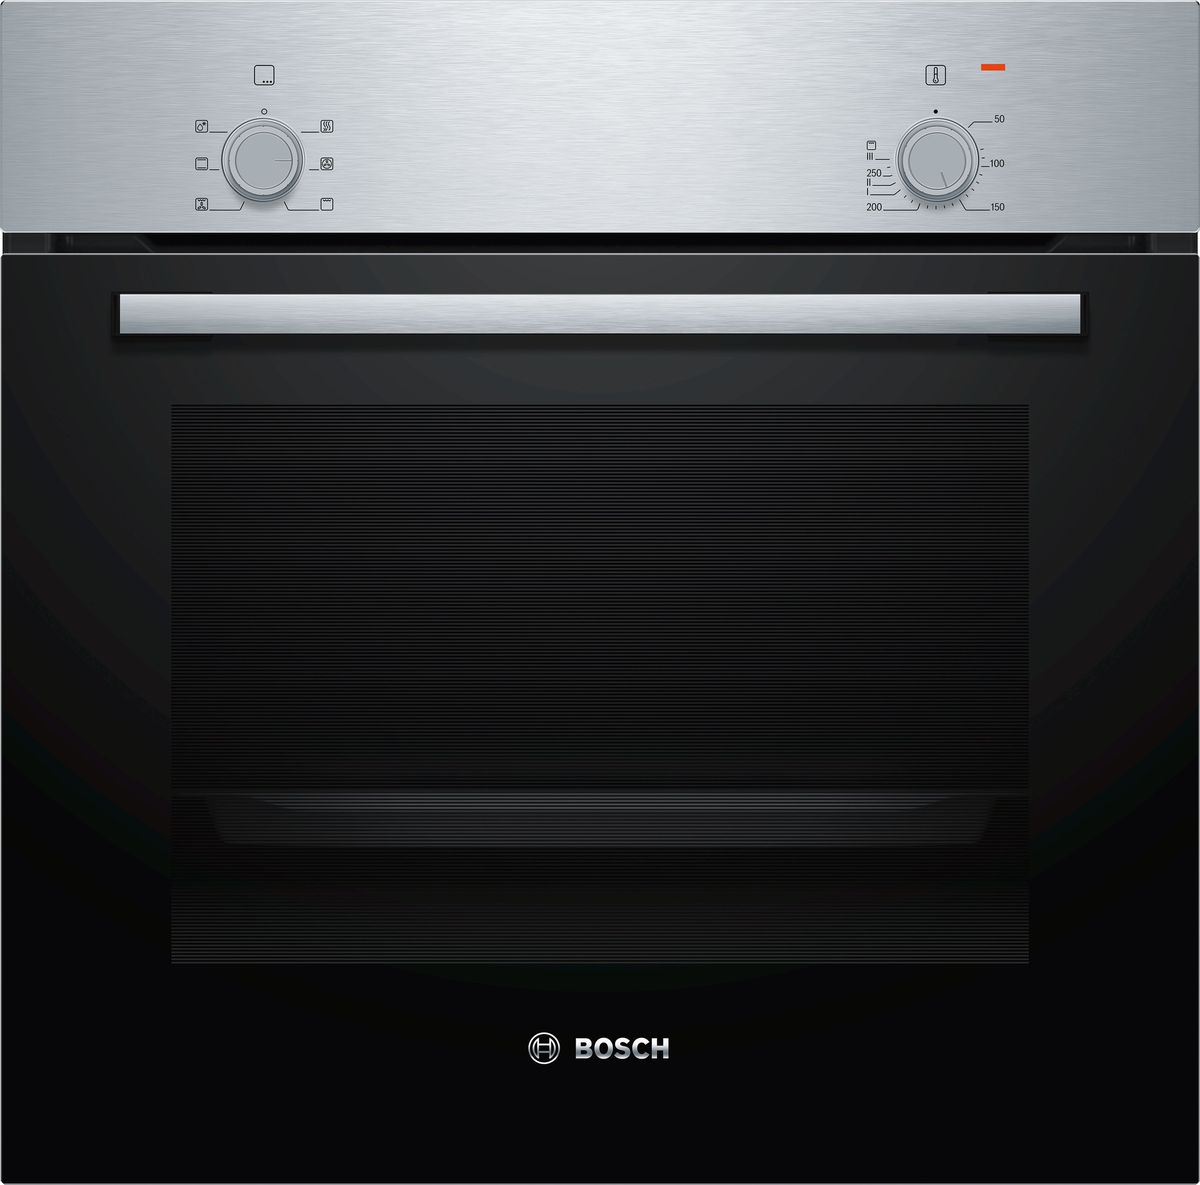 Bosch - Built in Oven - Serie 2 - Stainless steel